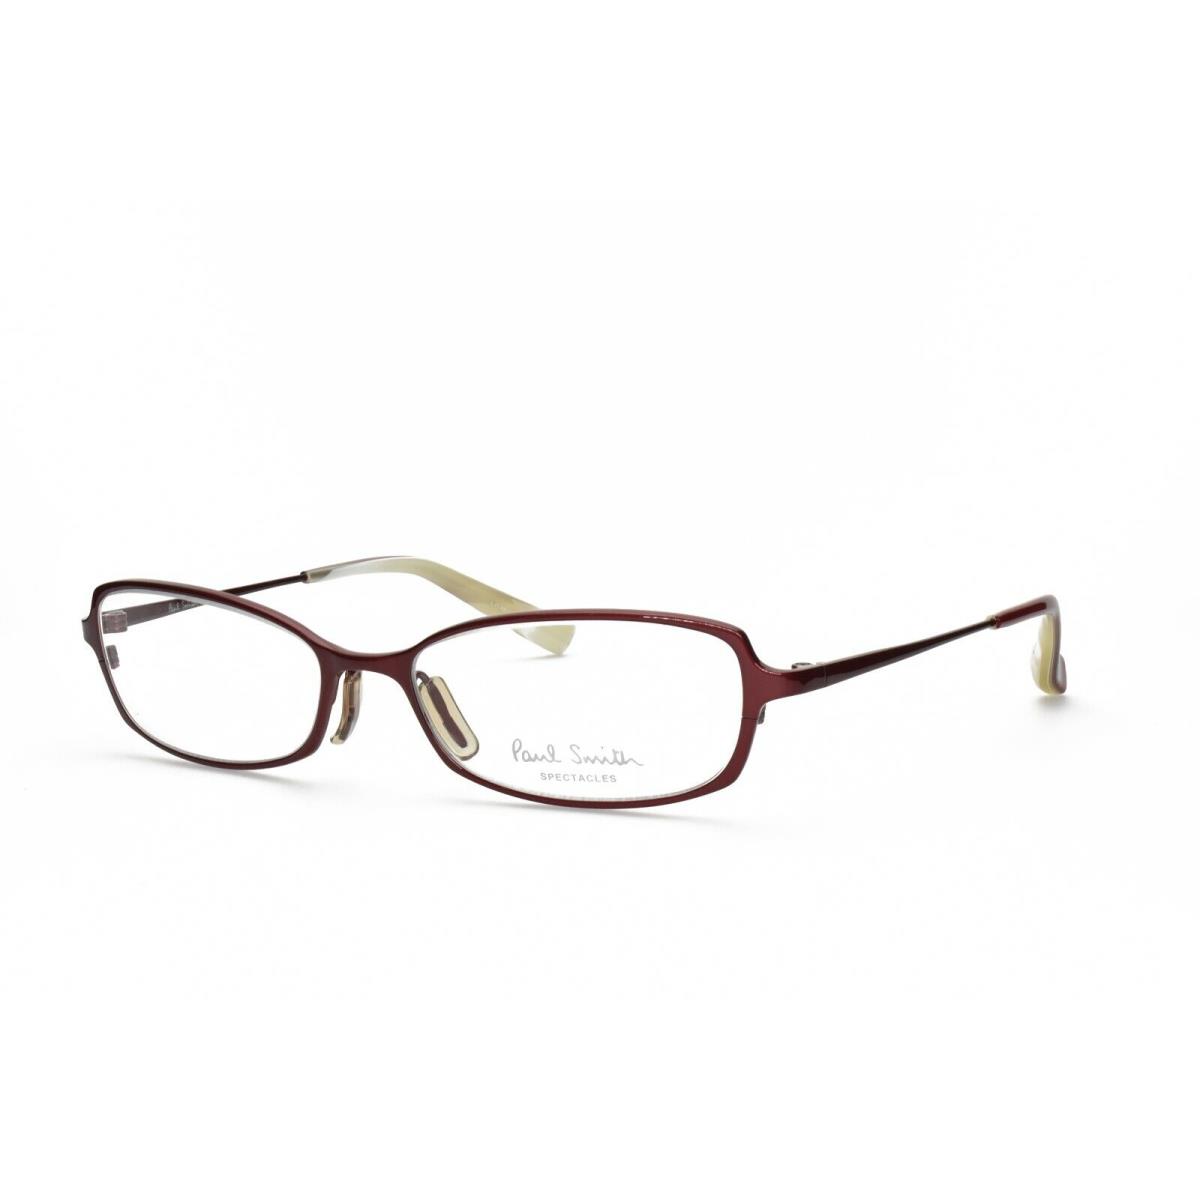 Paul Smith PS 188 CI Eyeglasses Frames Only 51-16-130